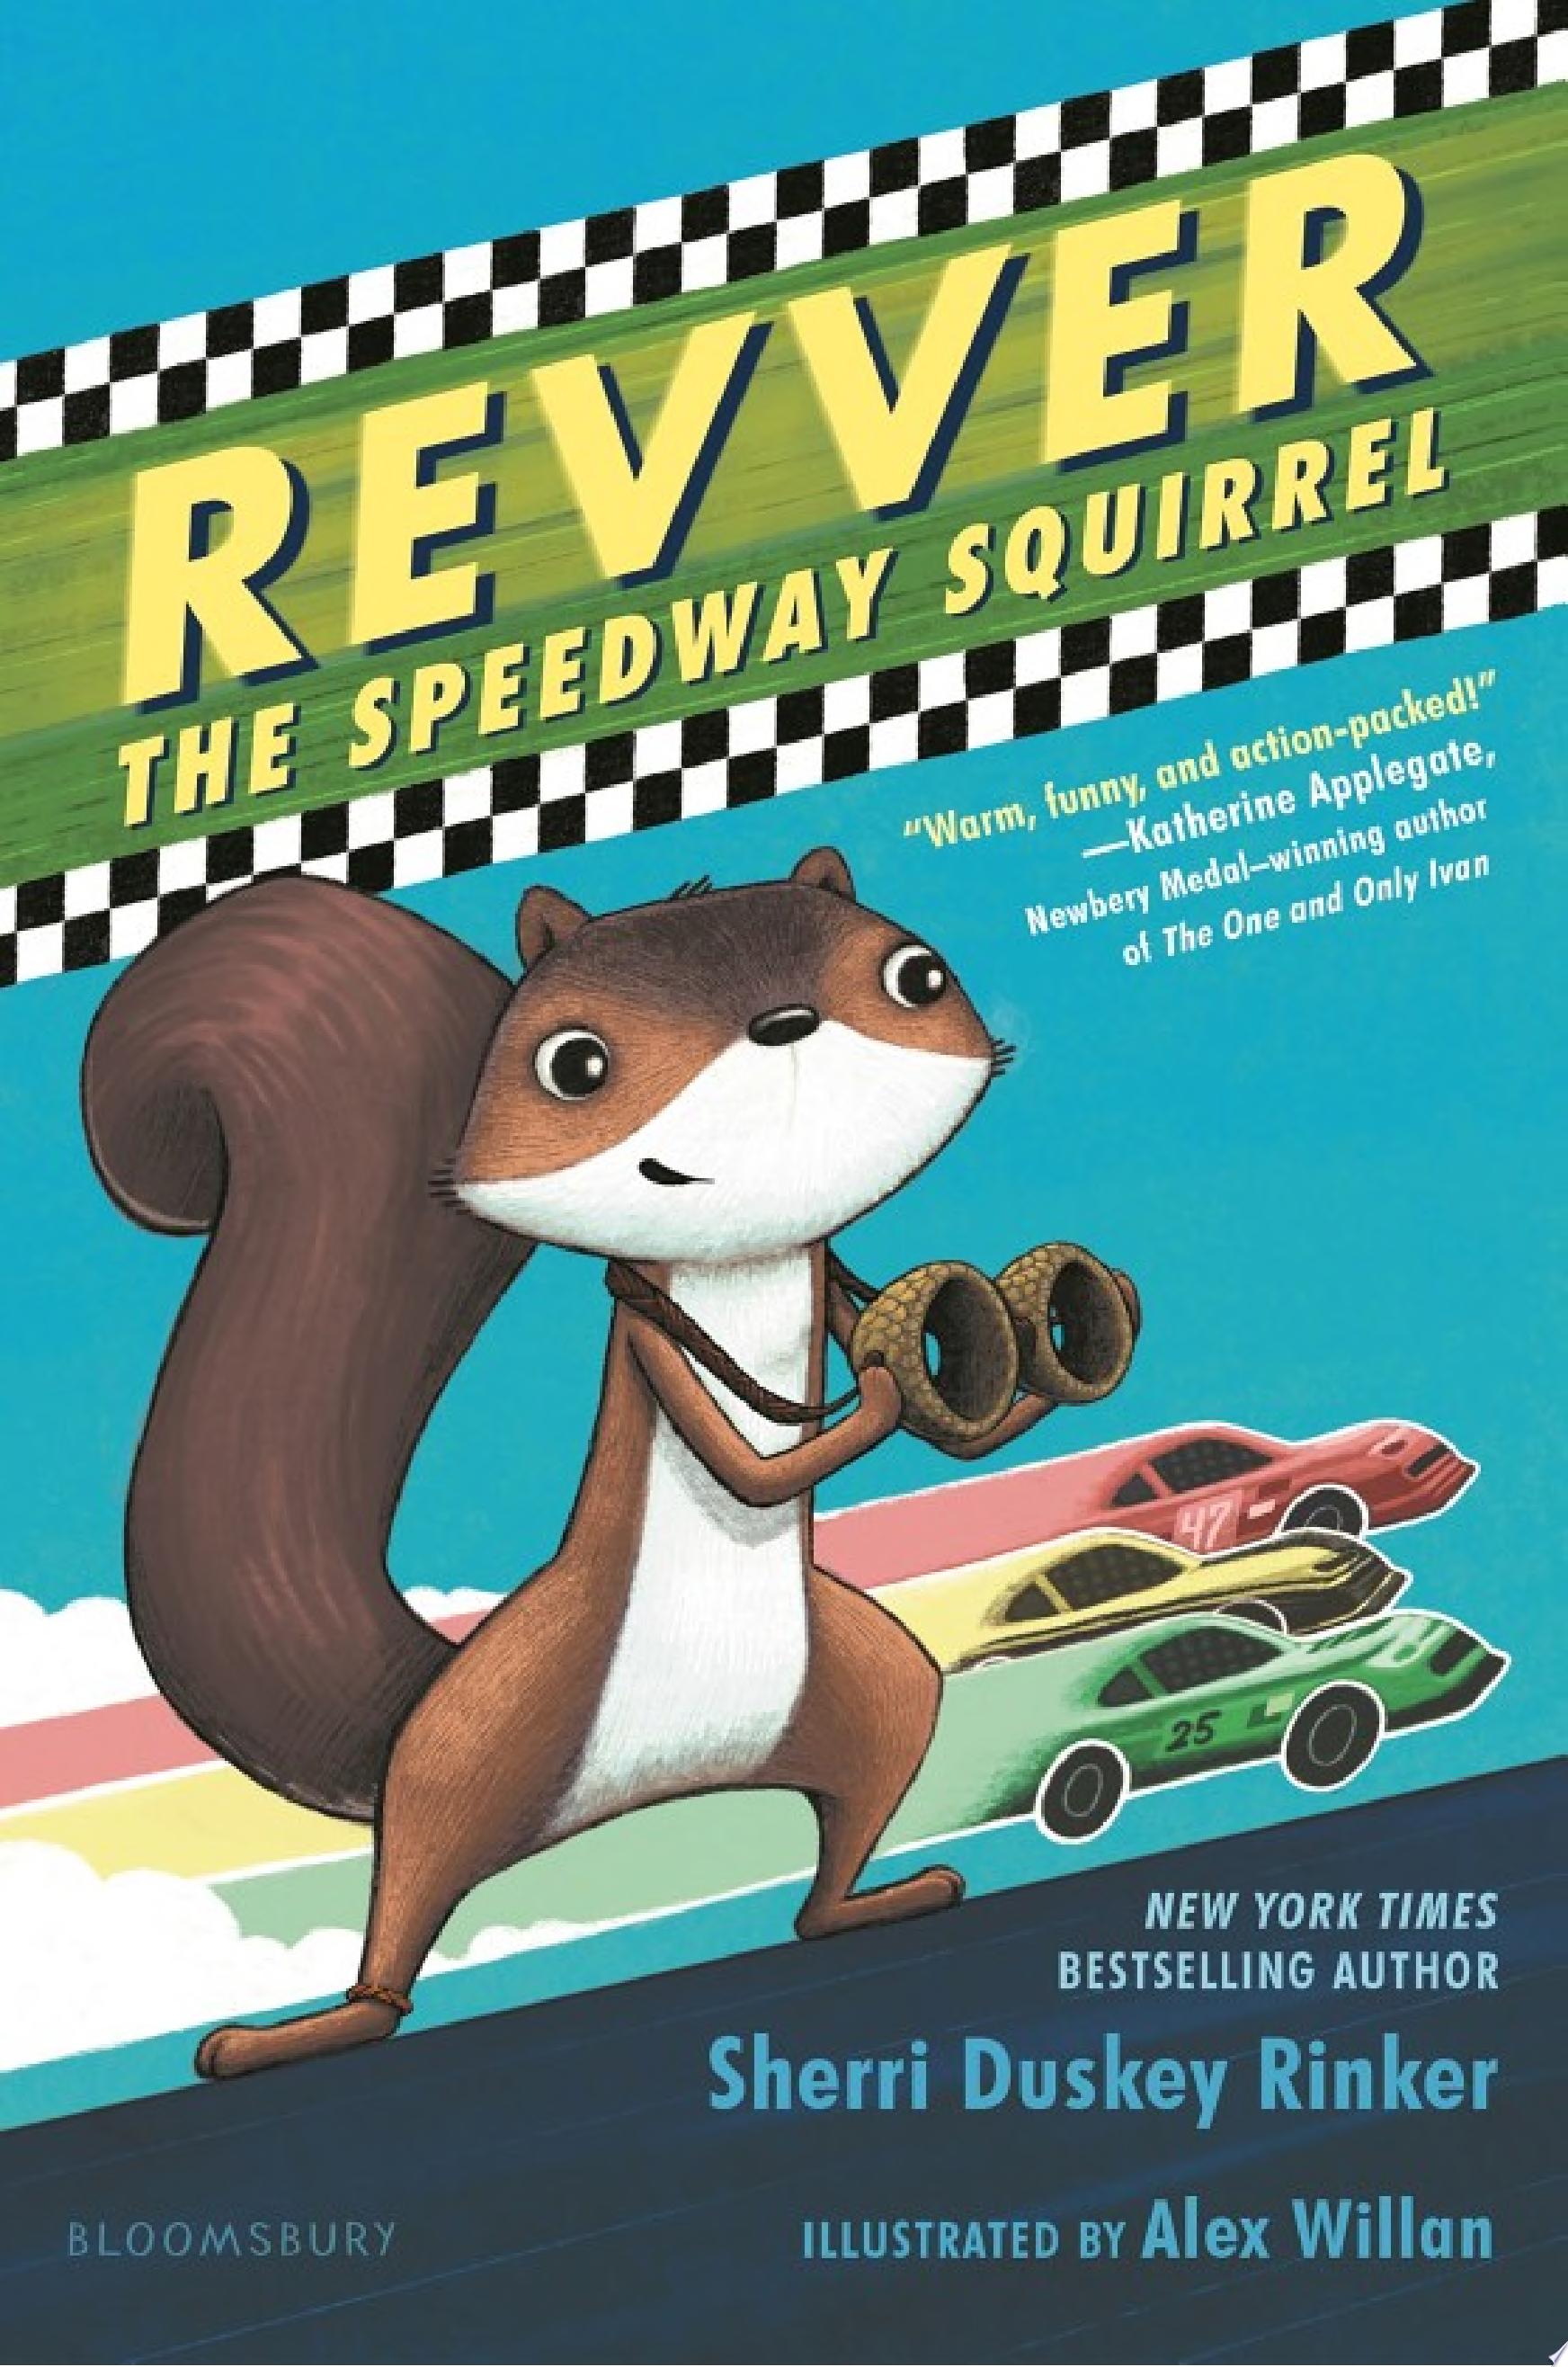 Image for "Revver the Speedway Squirrel"